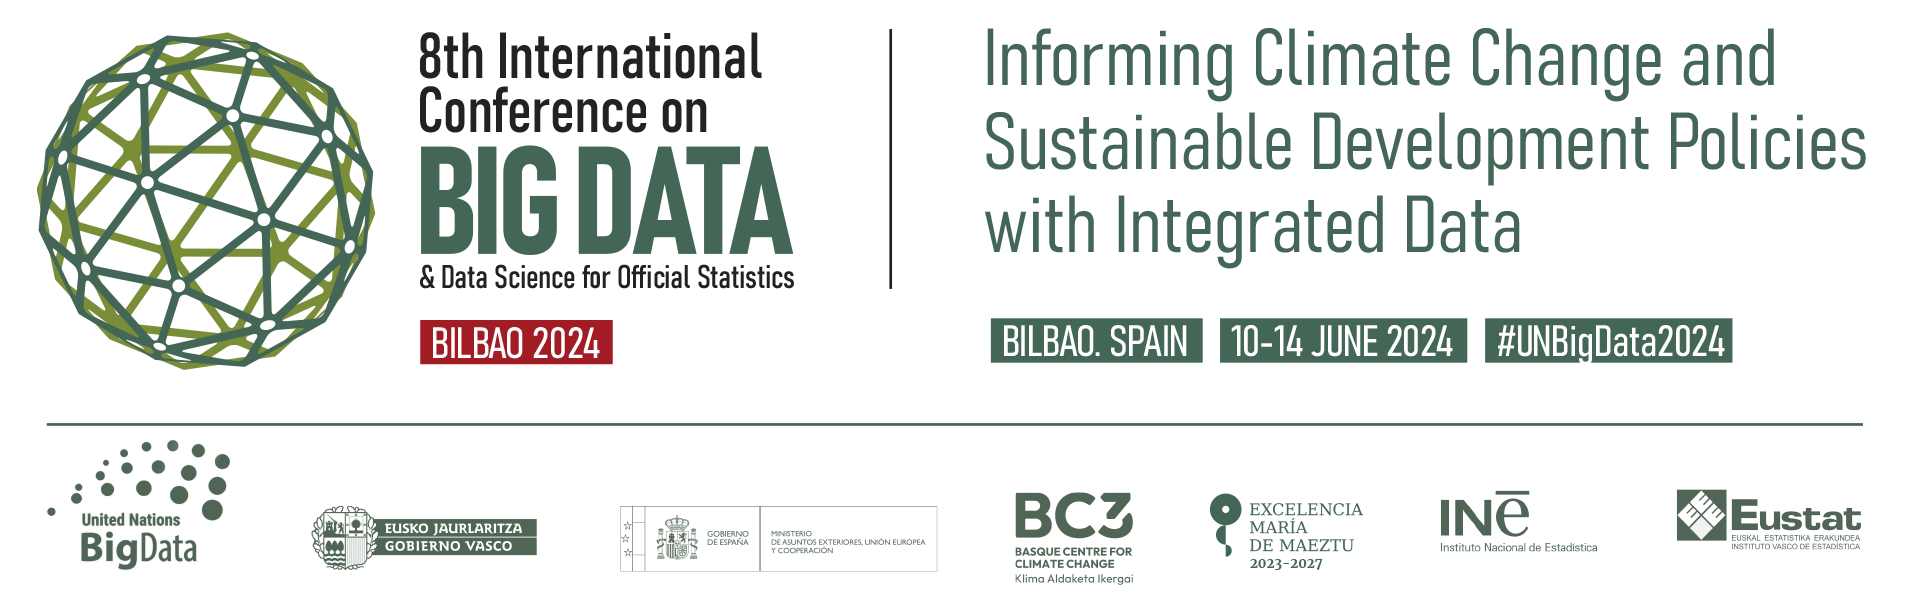 8th Intl. conference on Big Data & Data Science